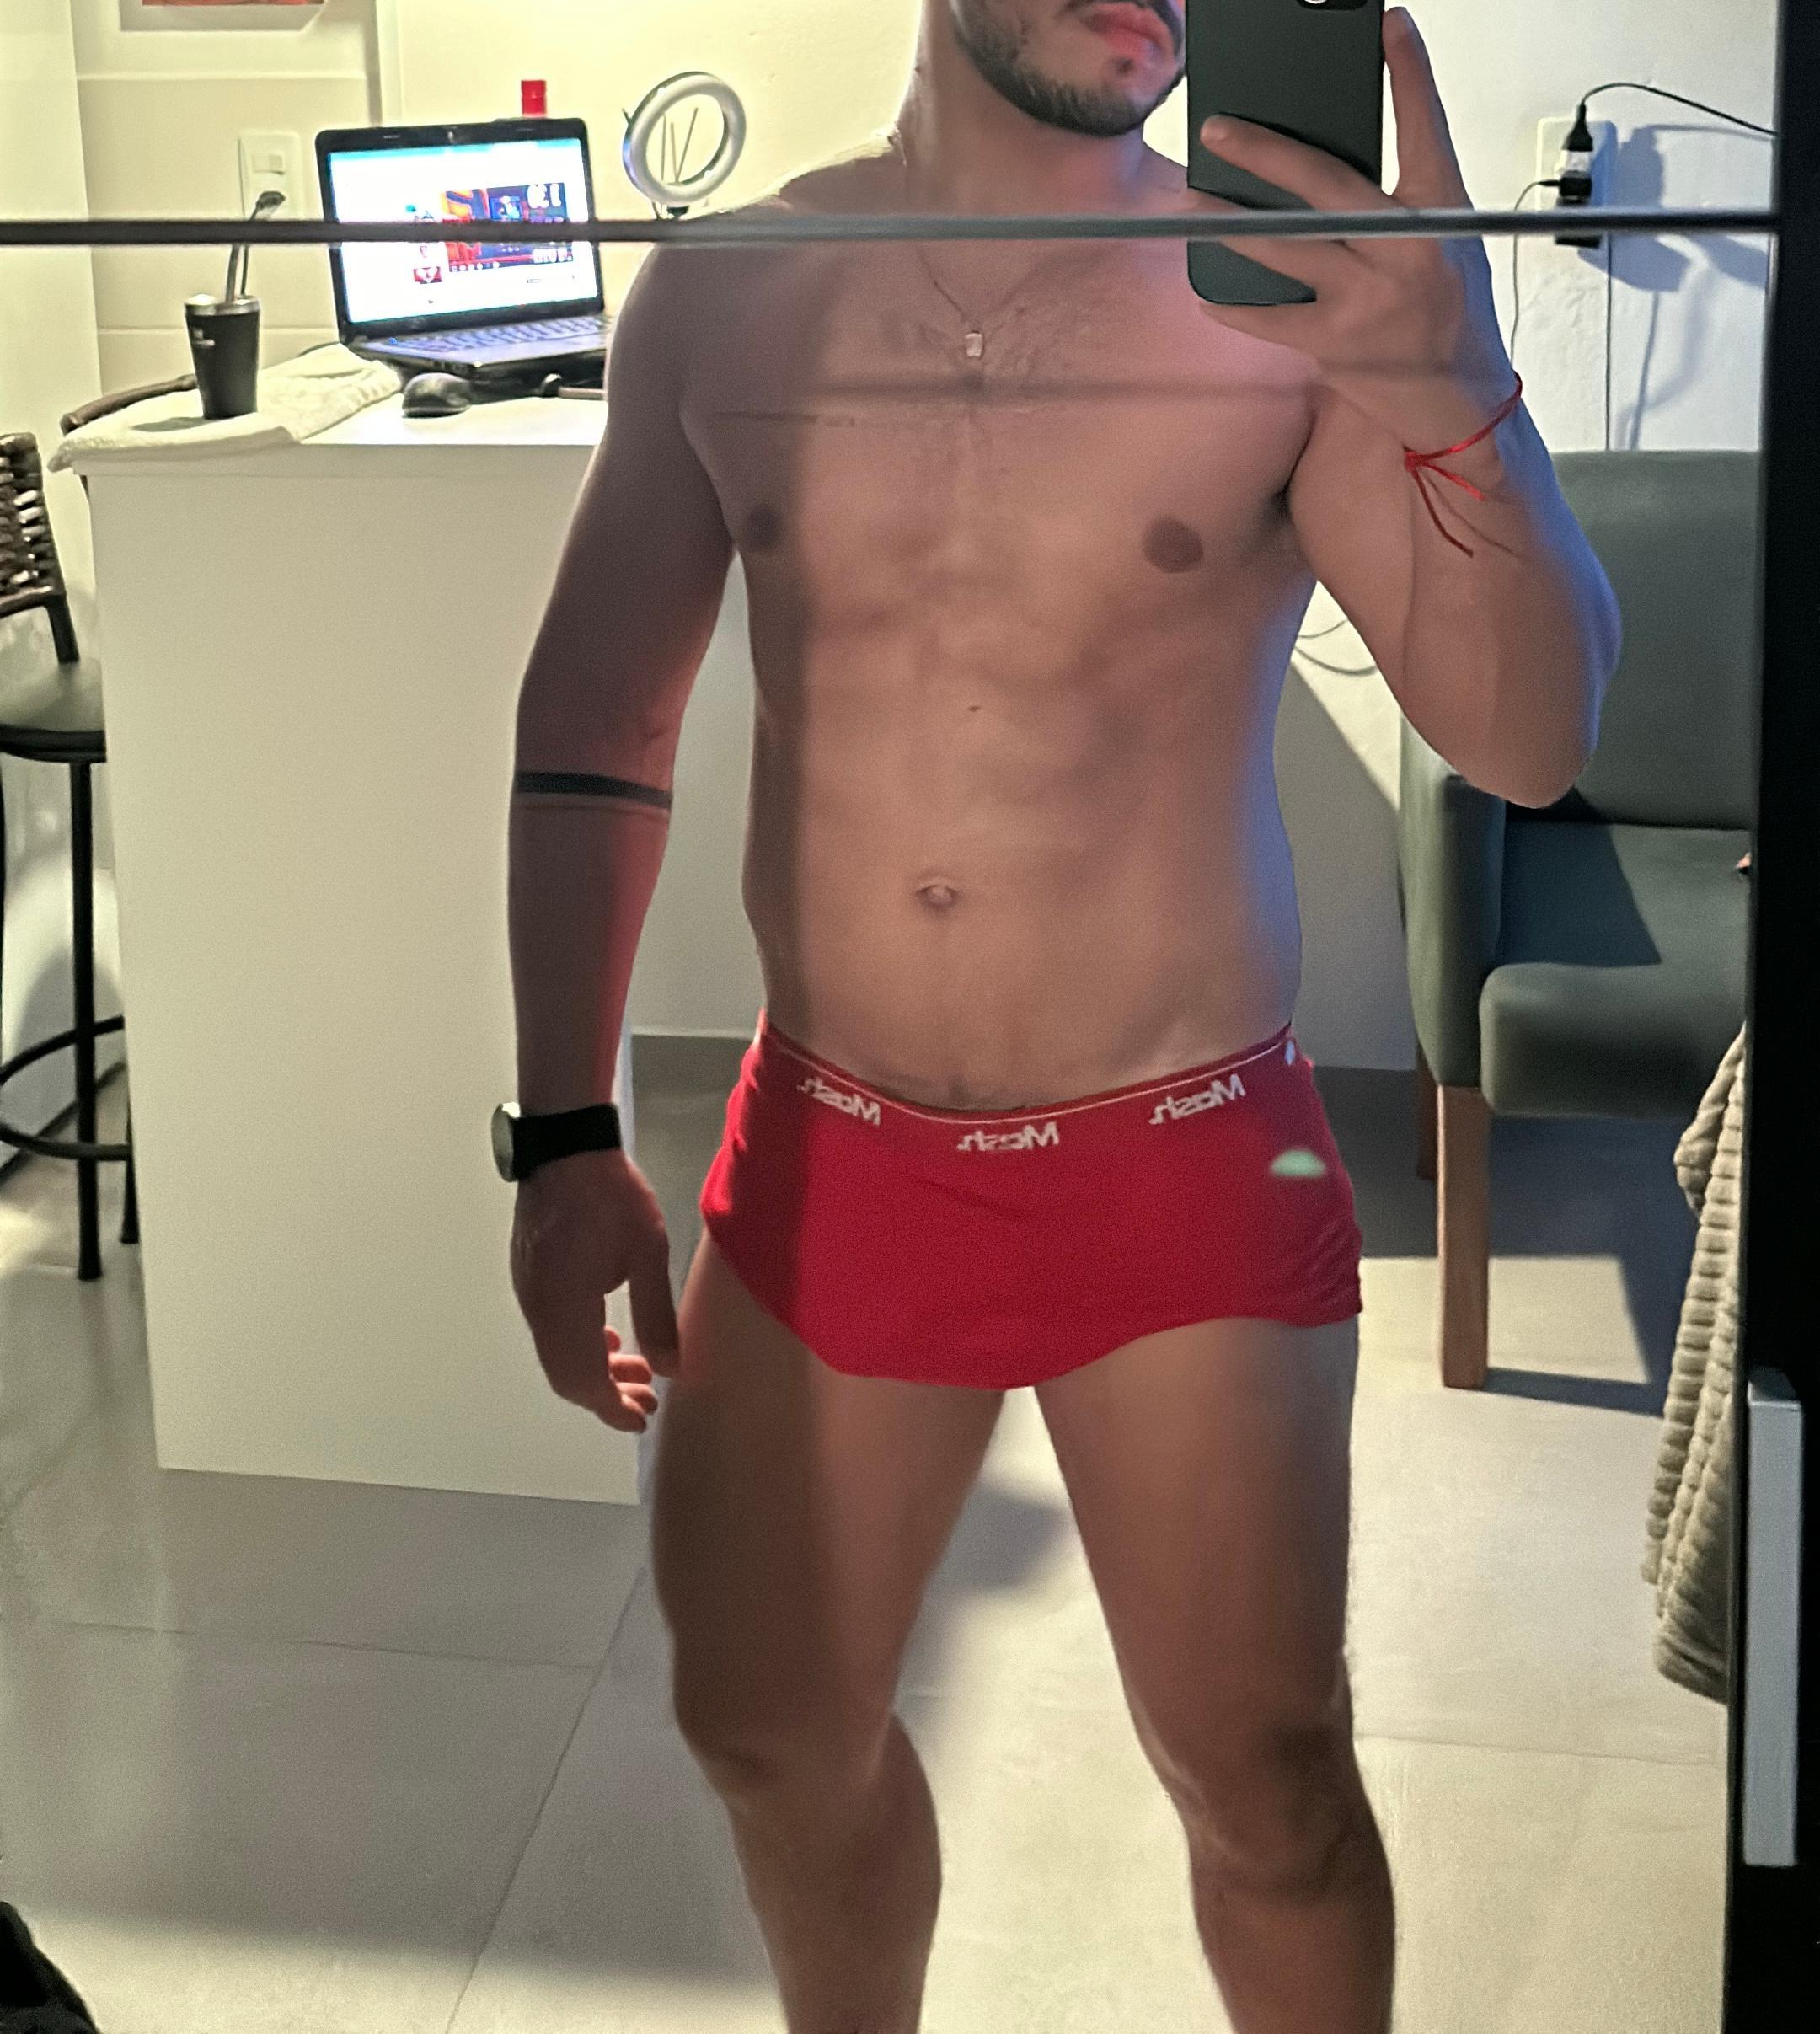 julianohot69 live cam on Cam4